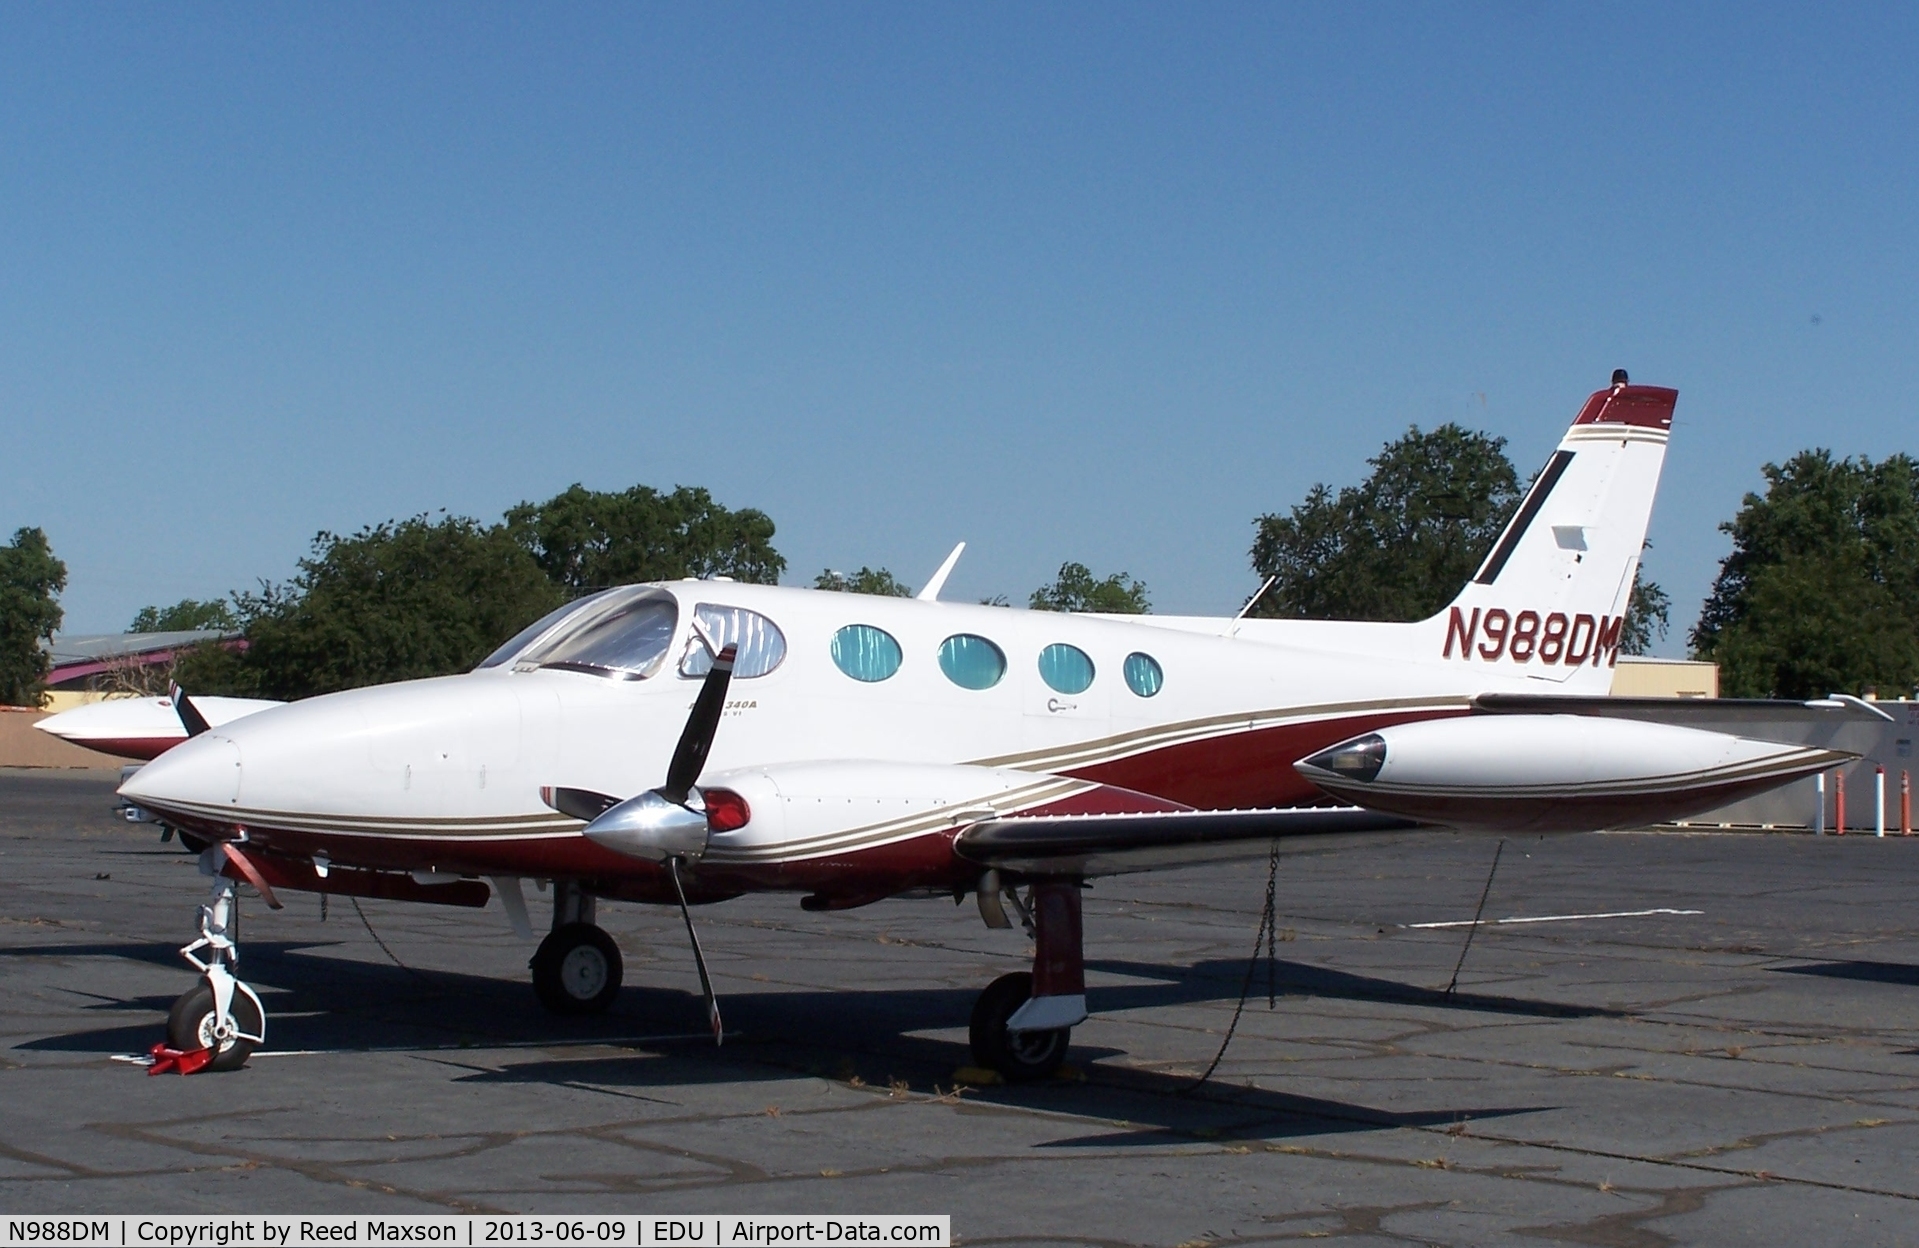 N988DM, 1981 Cessna 340A C/N 340A1244, Left front on tarmac